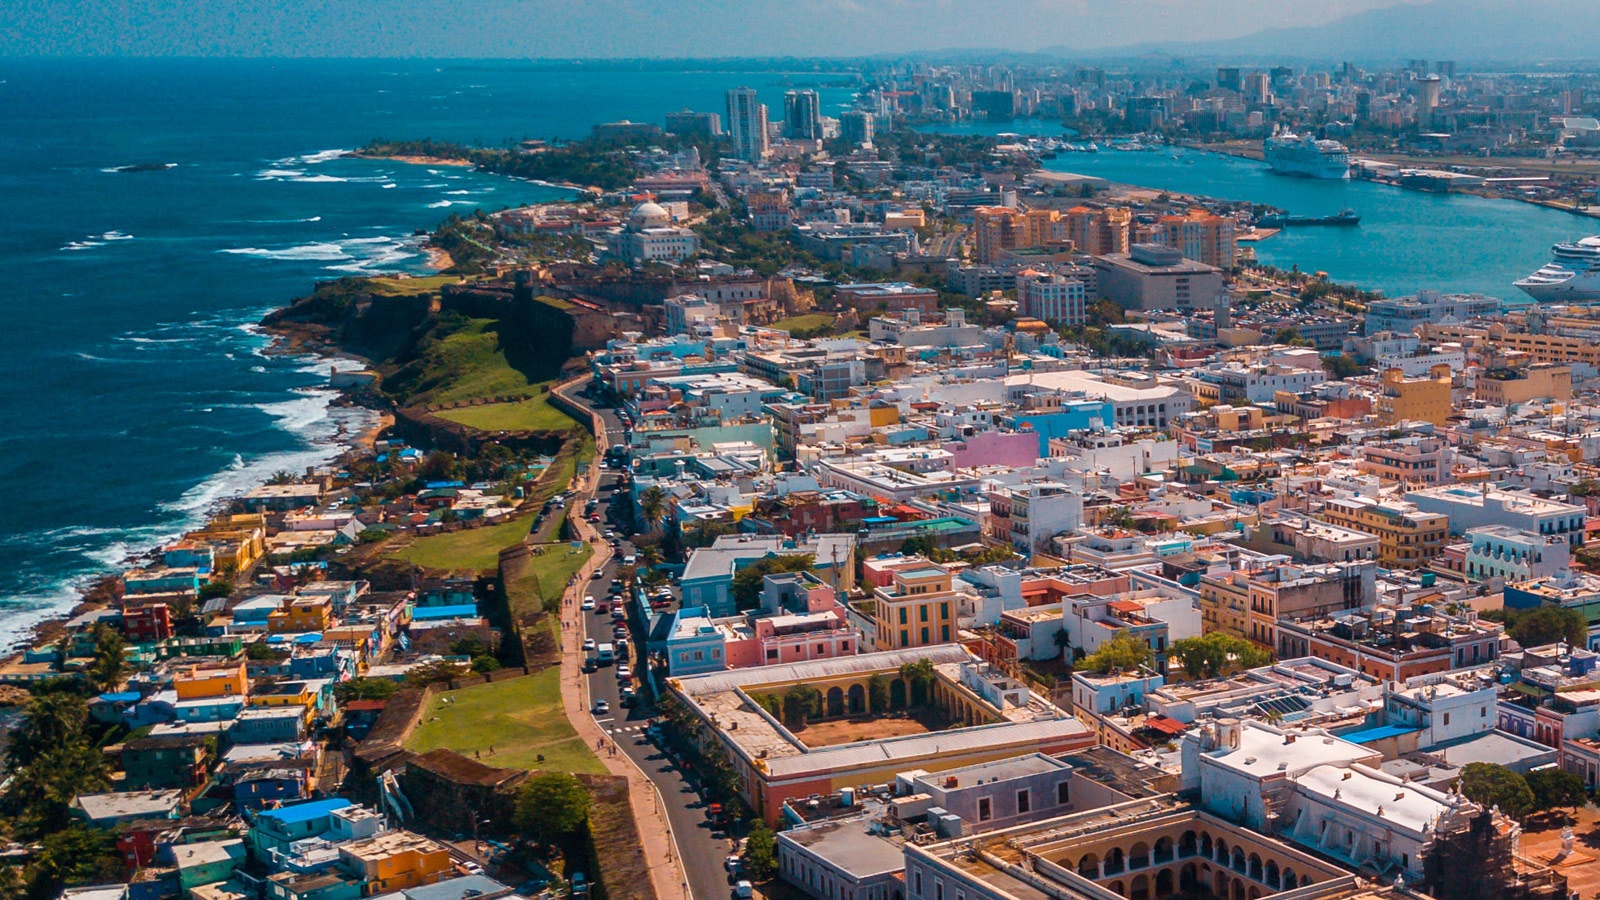 Aerial view of Puerto Rico coast and city